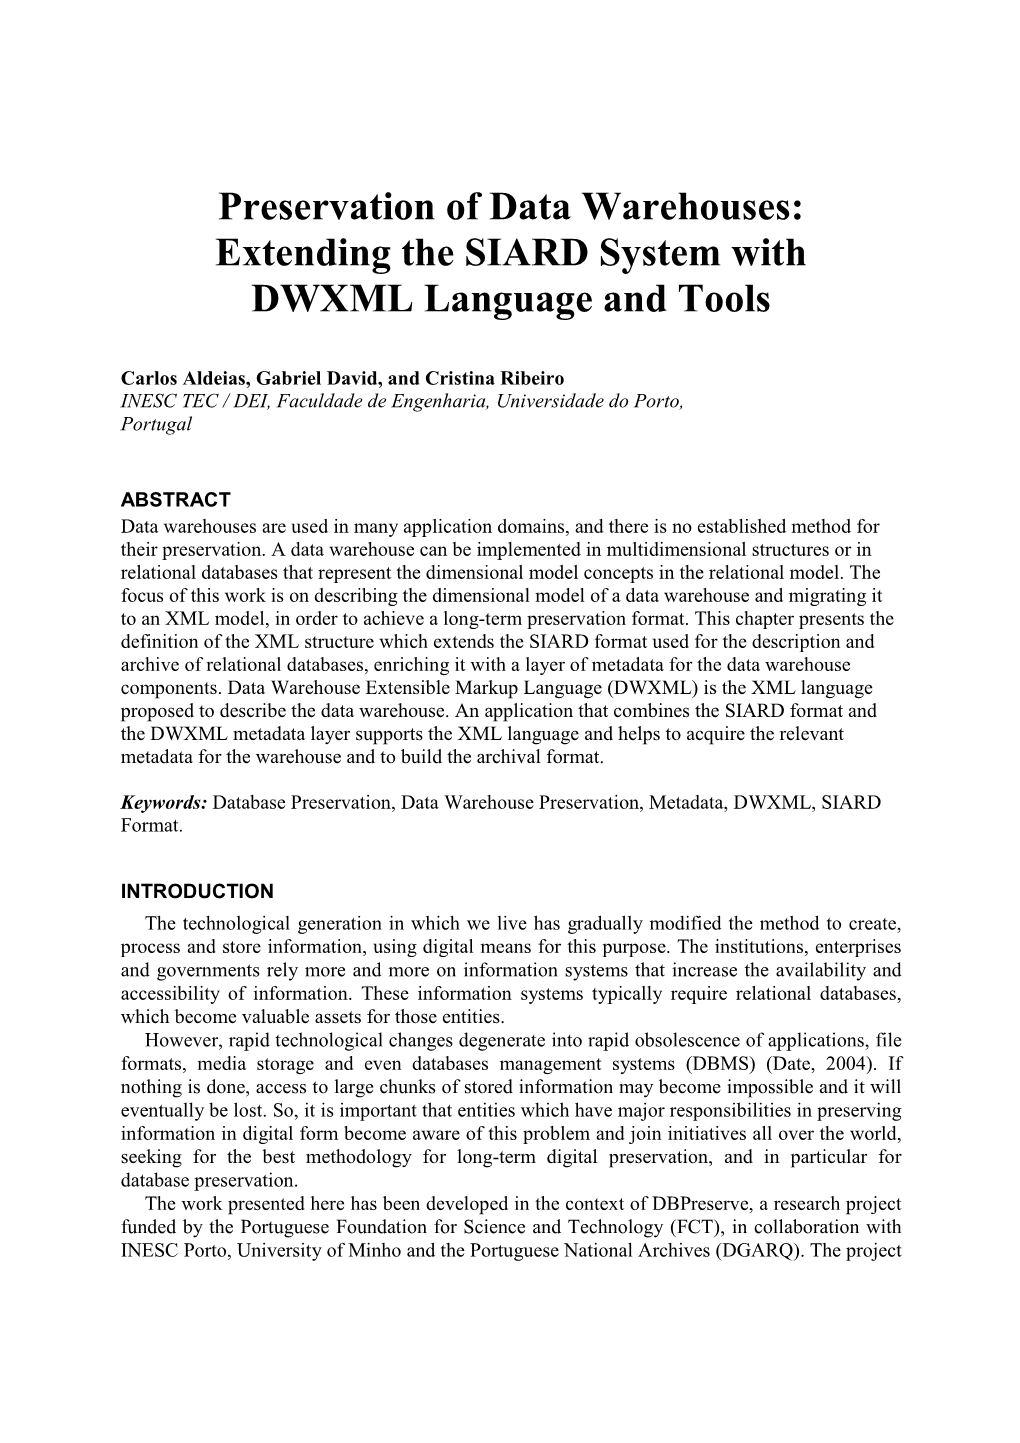 Preservation of Data Warehouses: Extending the SIARD System With